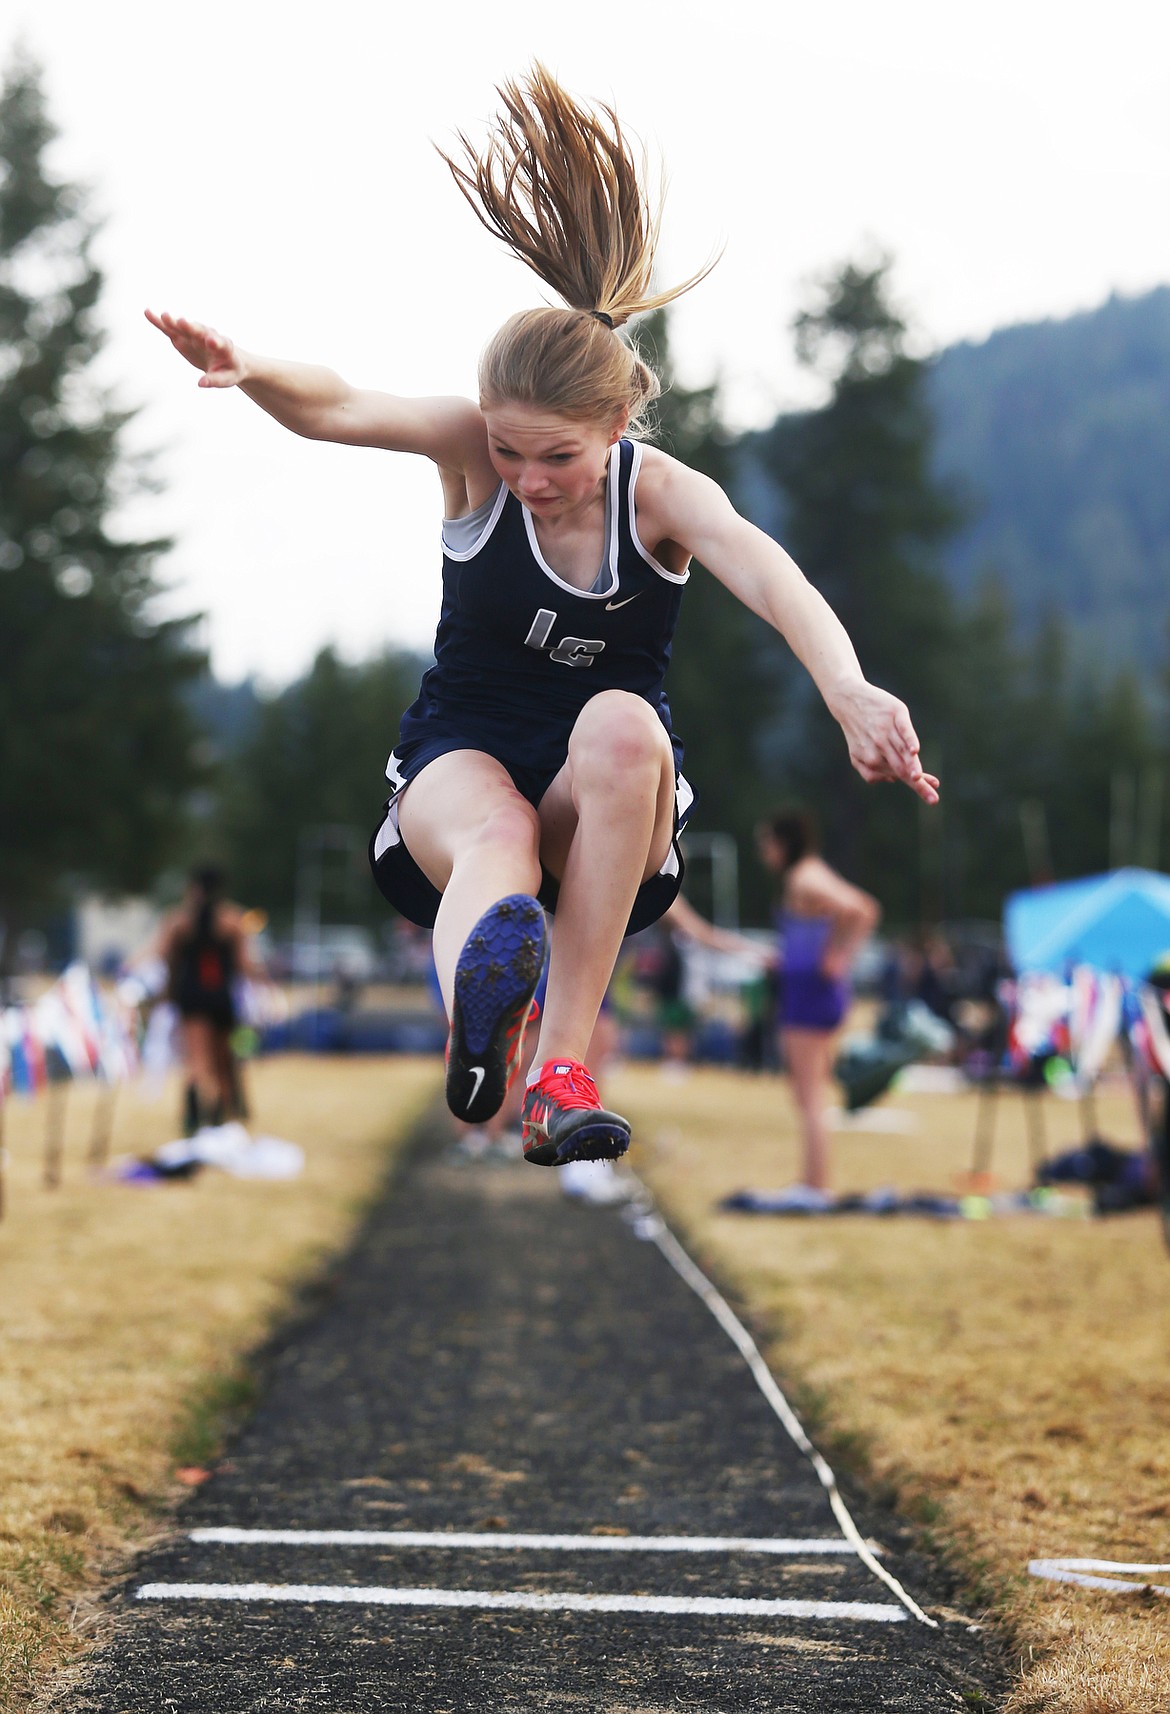 Lake City&#146;s Chloe Butler leaps a distance of 12 feet, 6 inches in the long jump Friday afternoon at the Kootenai County Challege track meet in Spirit Lake. (LOREN BENOIT/Press)